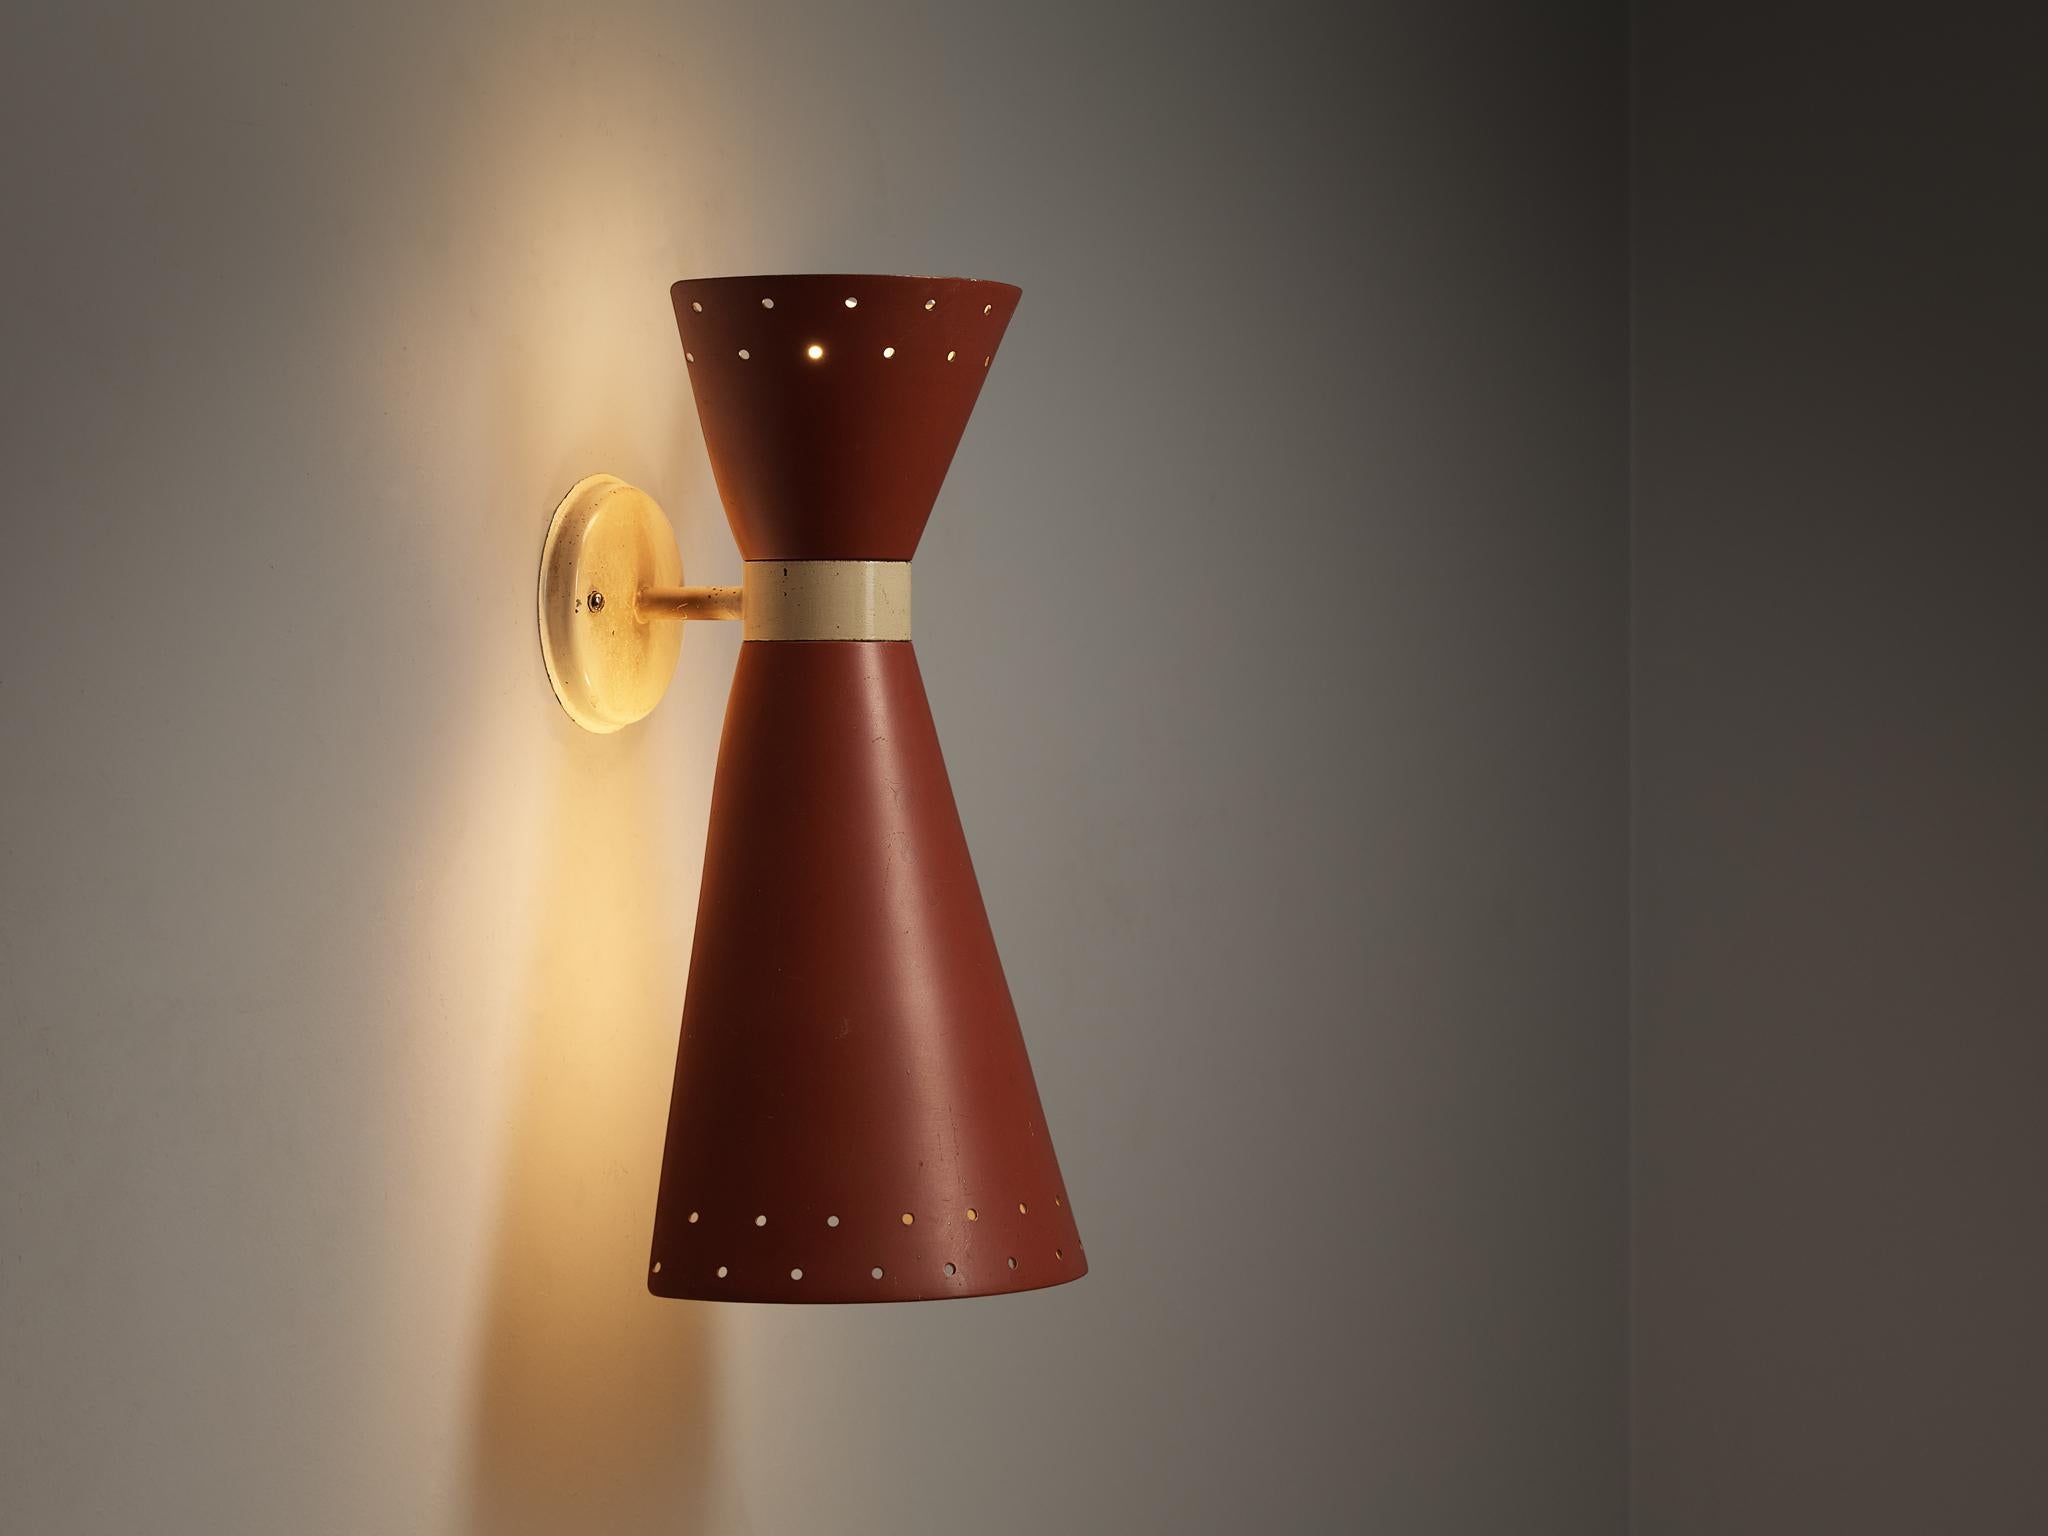 Wall light, coated aluminum, lacquered steel, Europe, 1950s

This wall light features conical-shaped shades on both sides executed in an earth-toned red color. Emitting light both upward and downward, this fixture engenders a warm and inviting